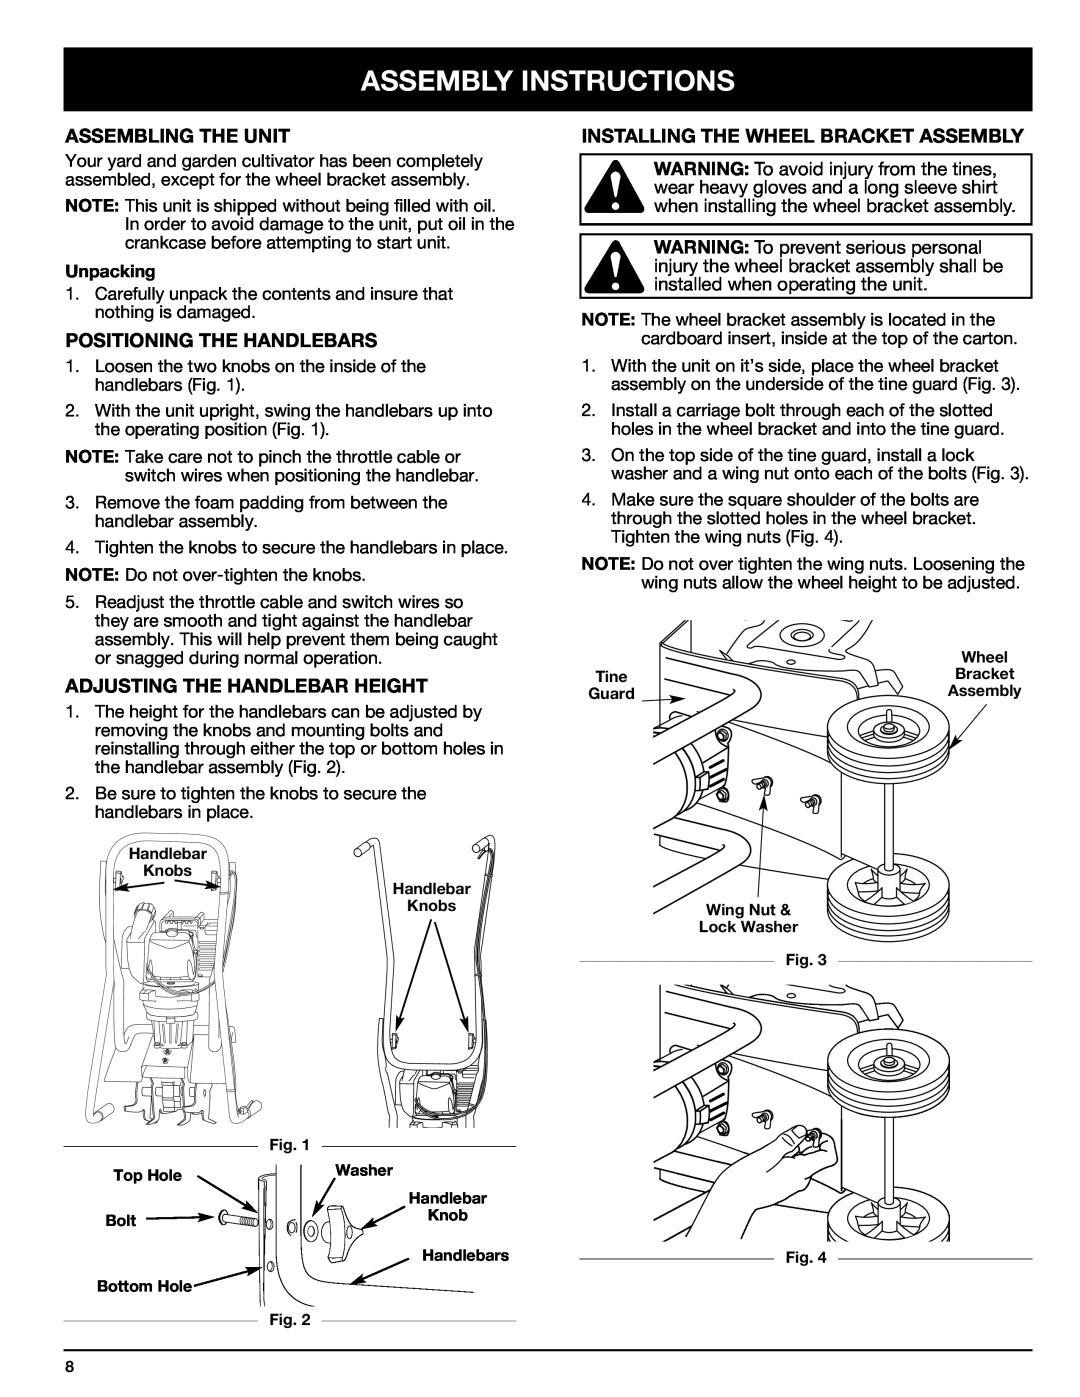 Ryobi Outdoor 510r Assembly Instructions, Assembling The Unit, Positioning The Handlebars, Adjusting The Handlebar Height 